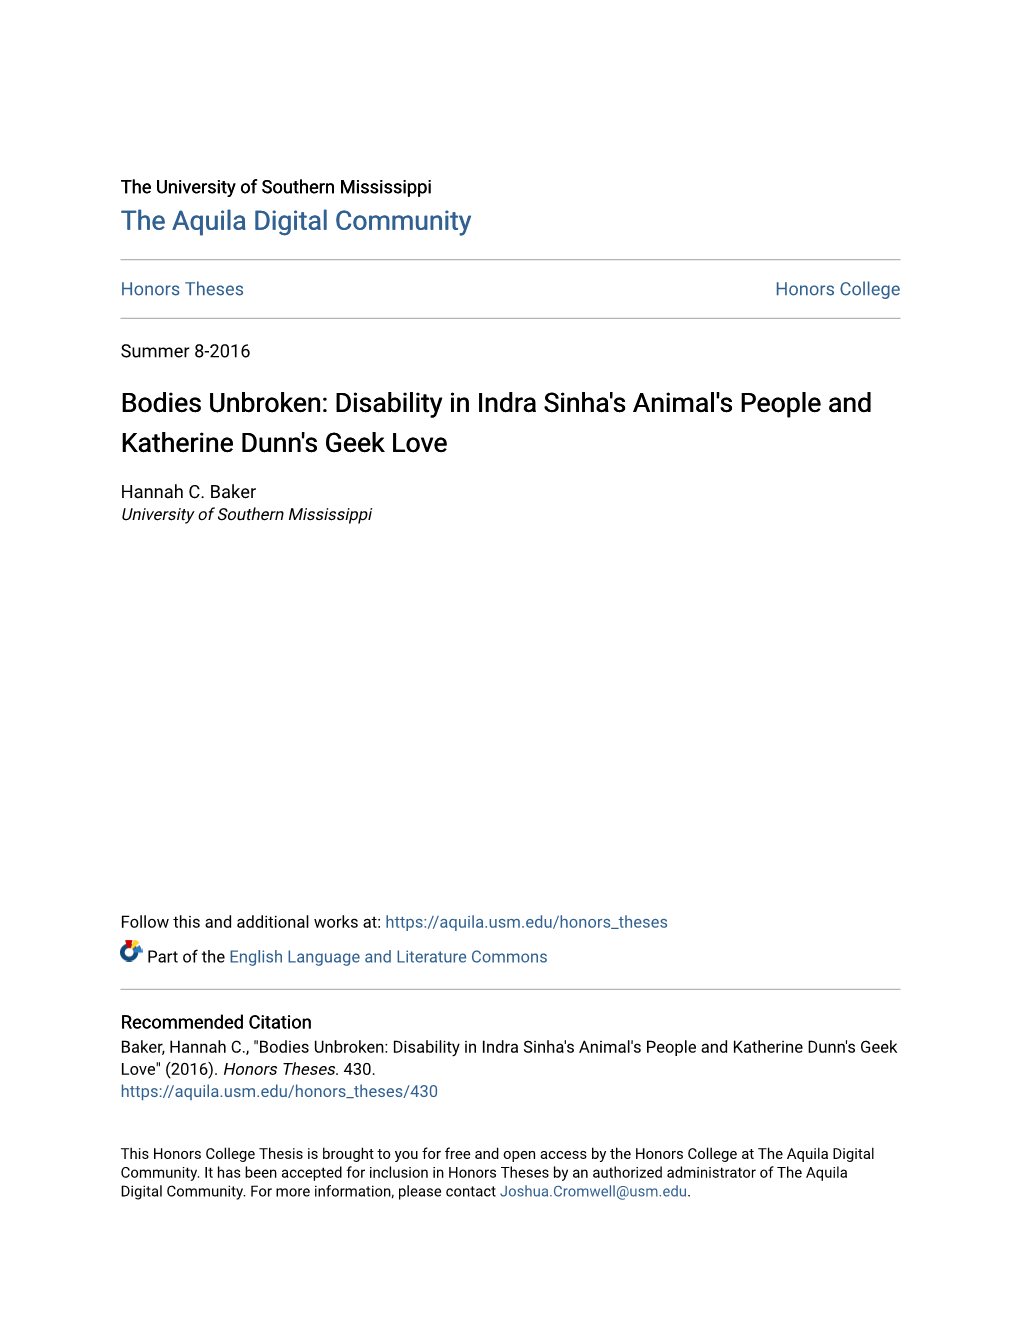 Disability in Indra Sinha's Animal's People and Katherine Dunn's Geek Love